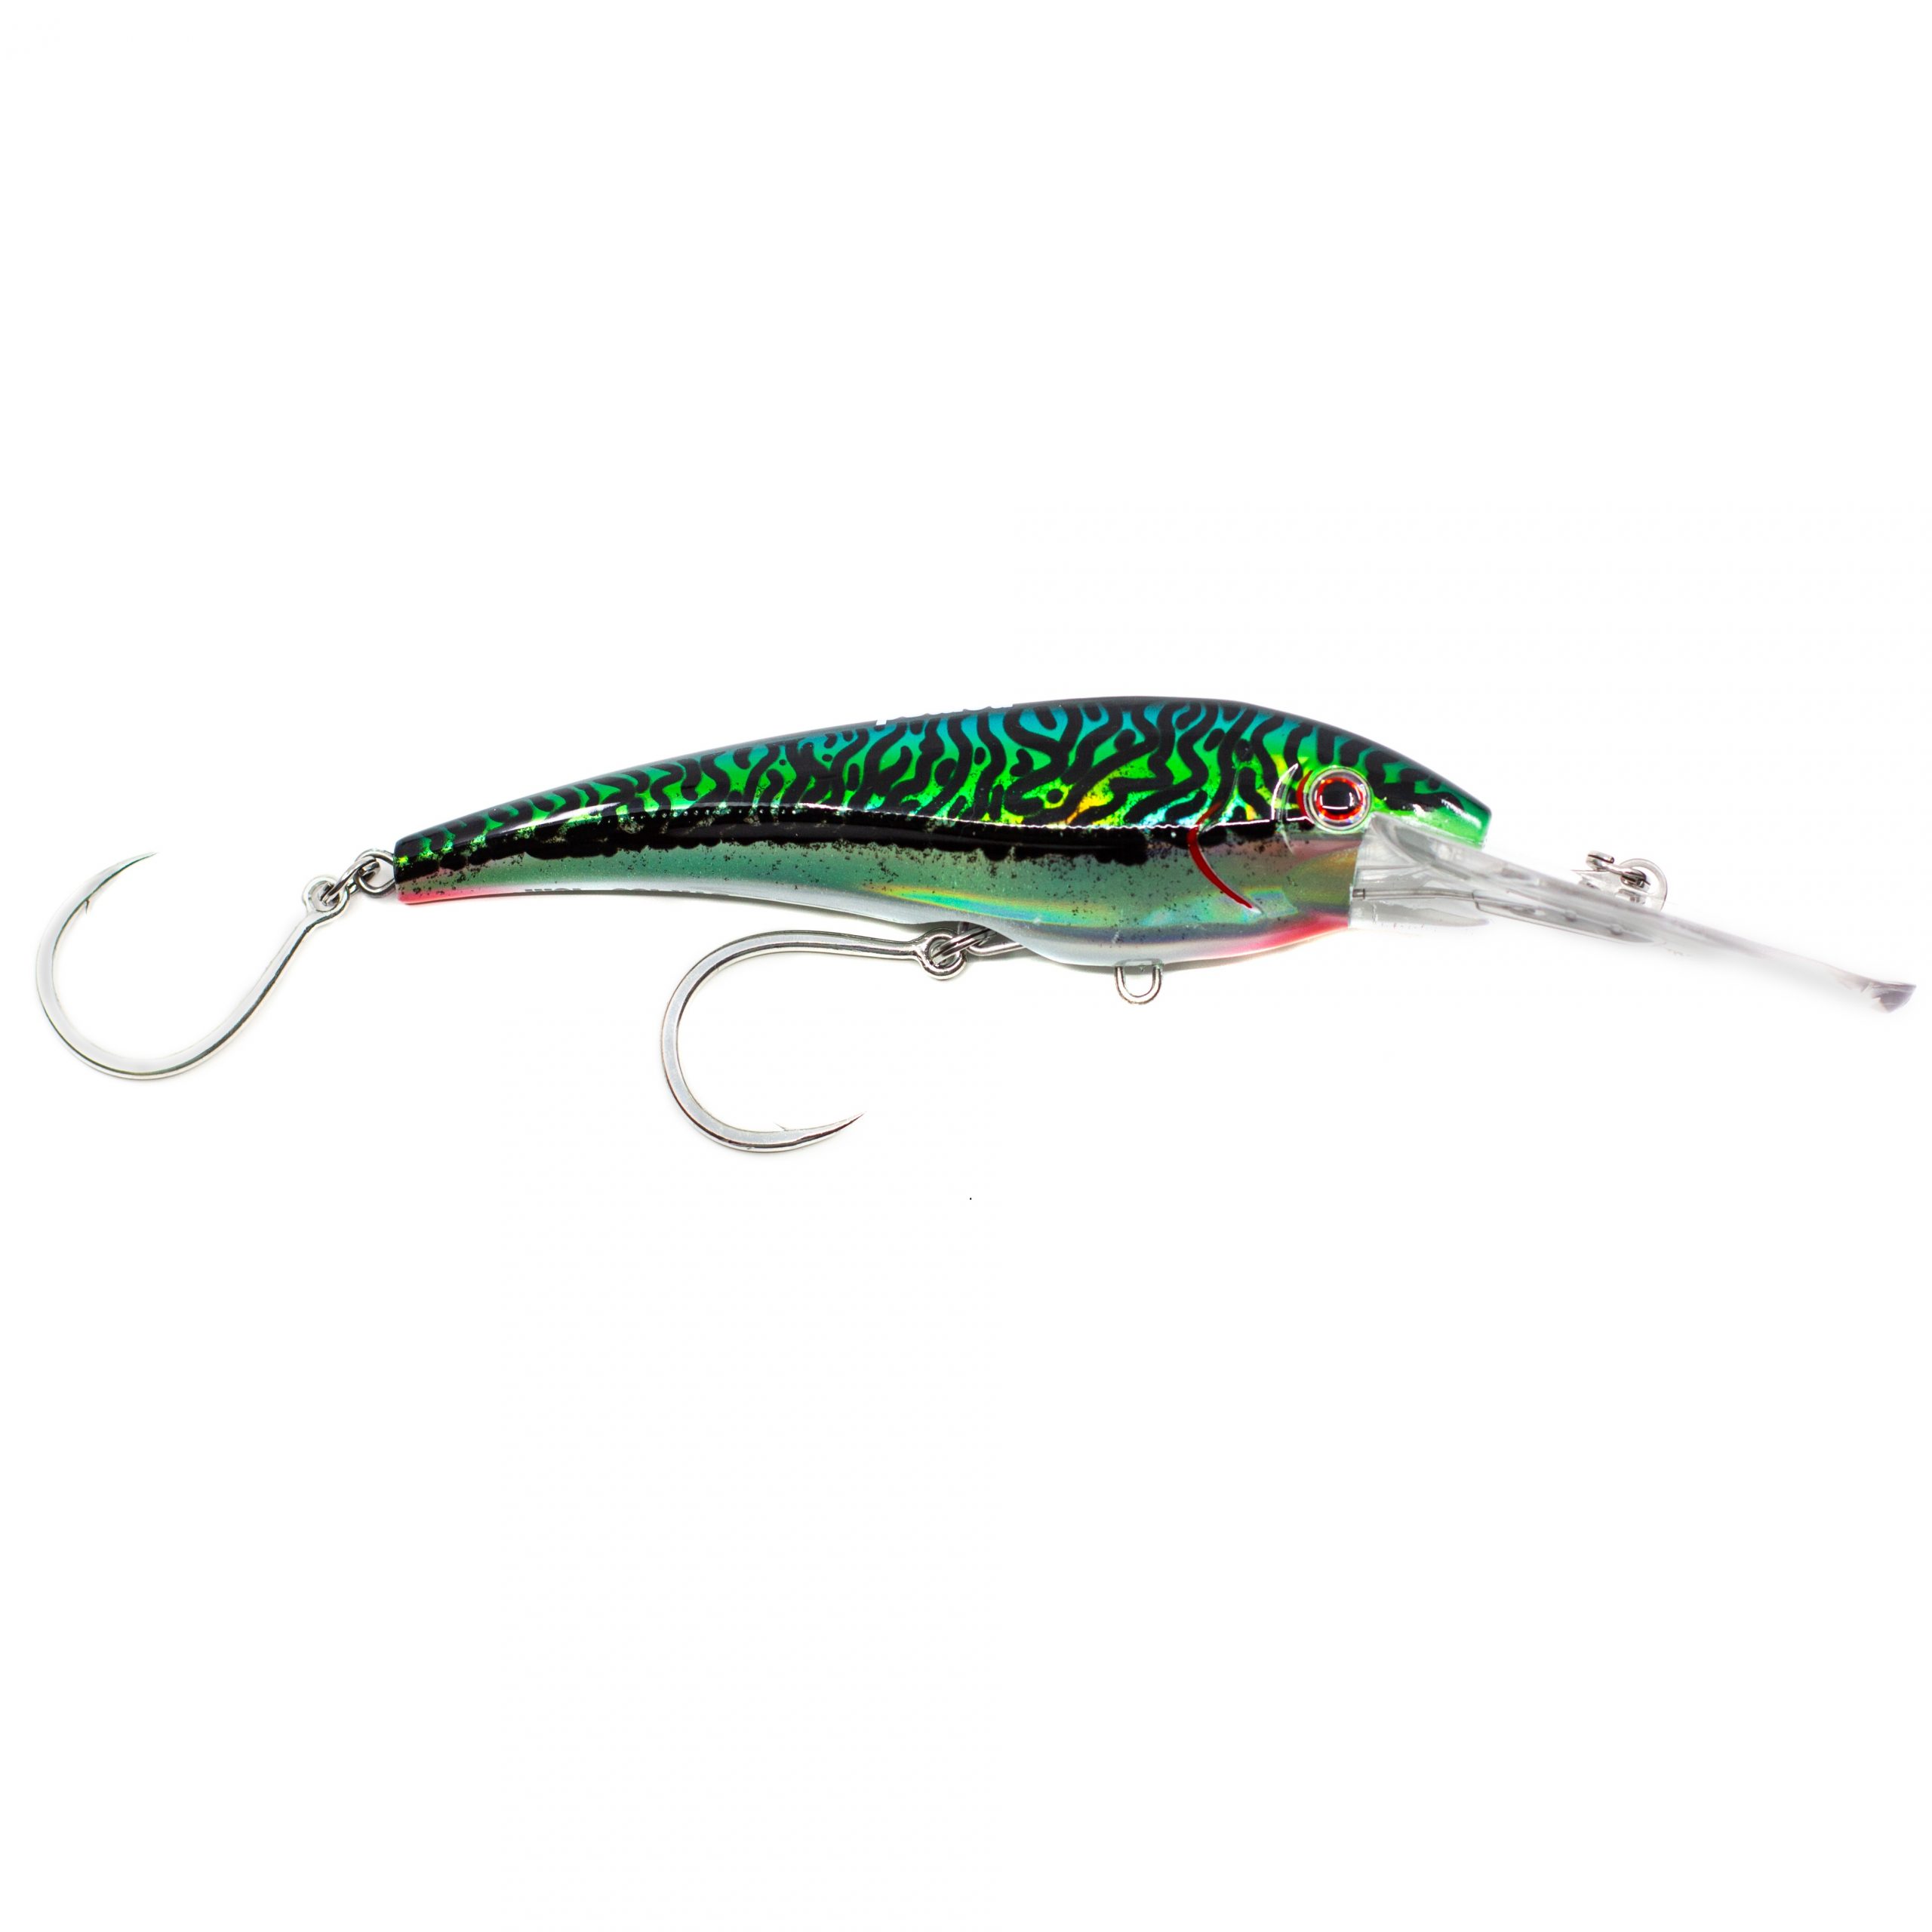 Nomad DTX Minnow 165mm Lures